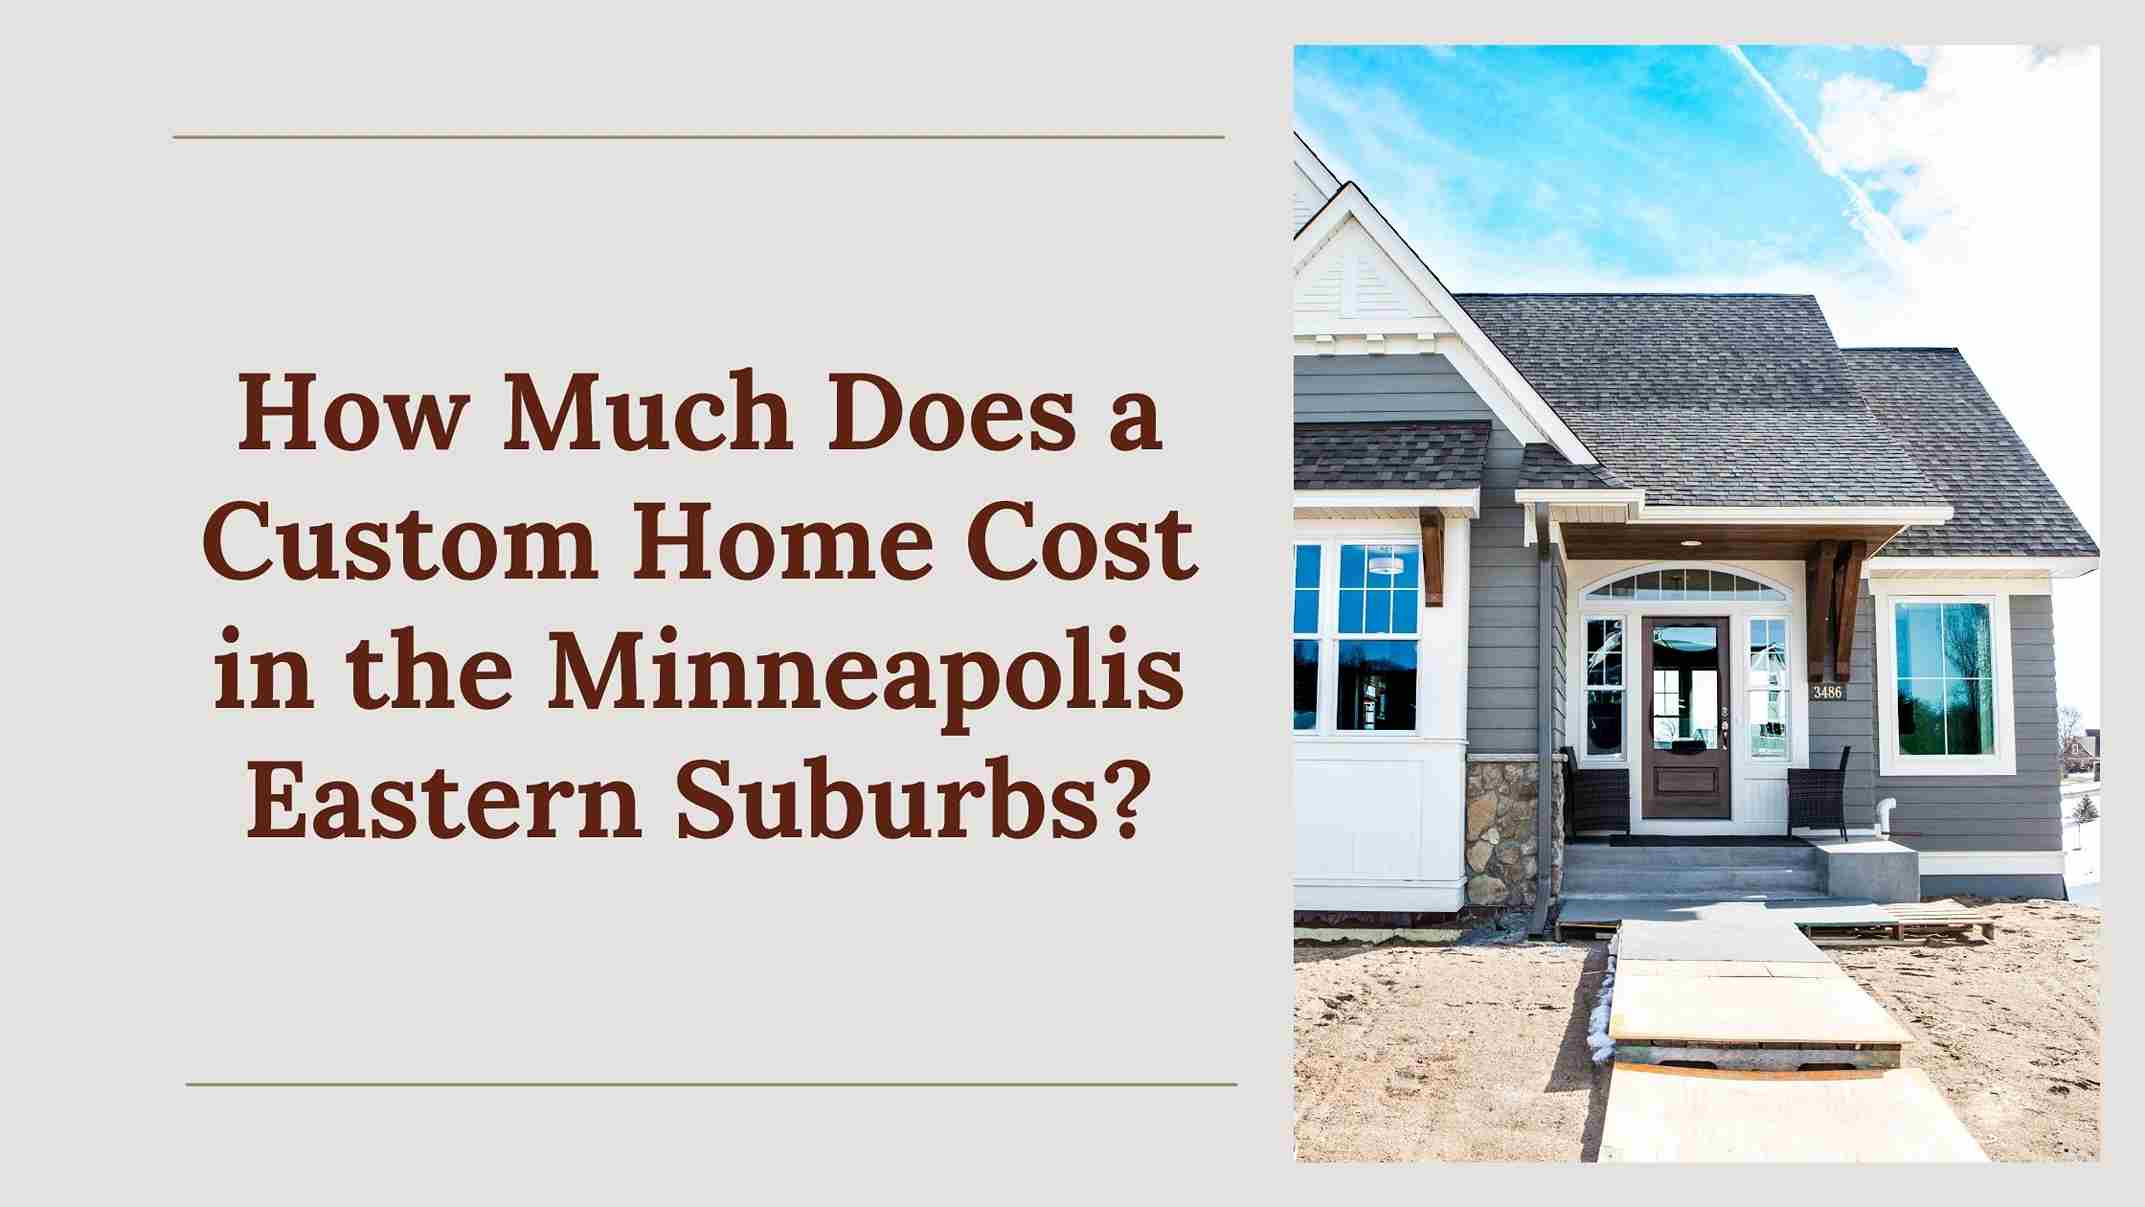 How Much Does a Custom Home Cost in the East Metro Suburbs?